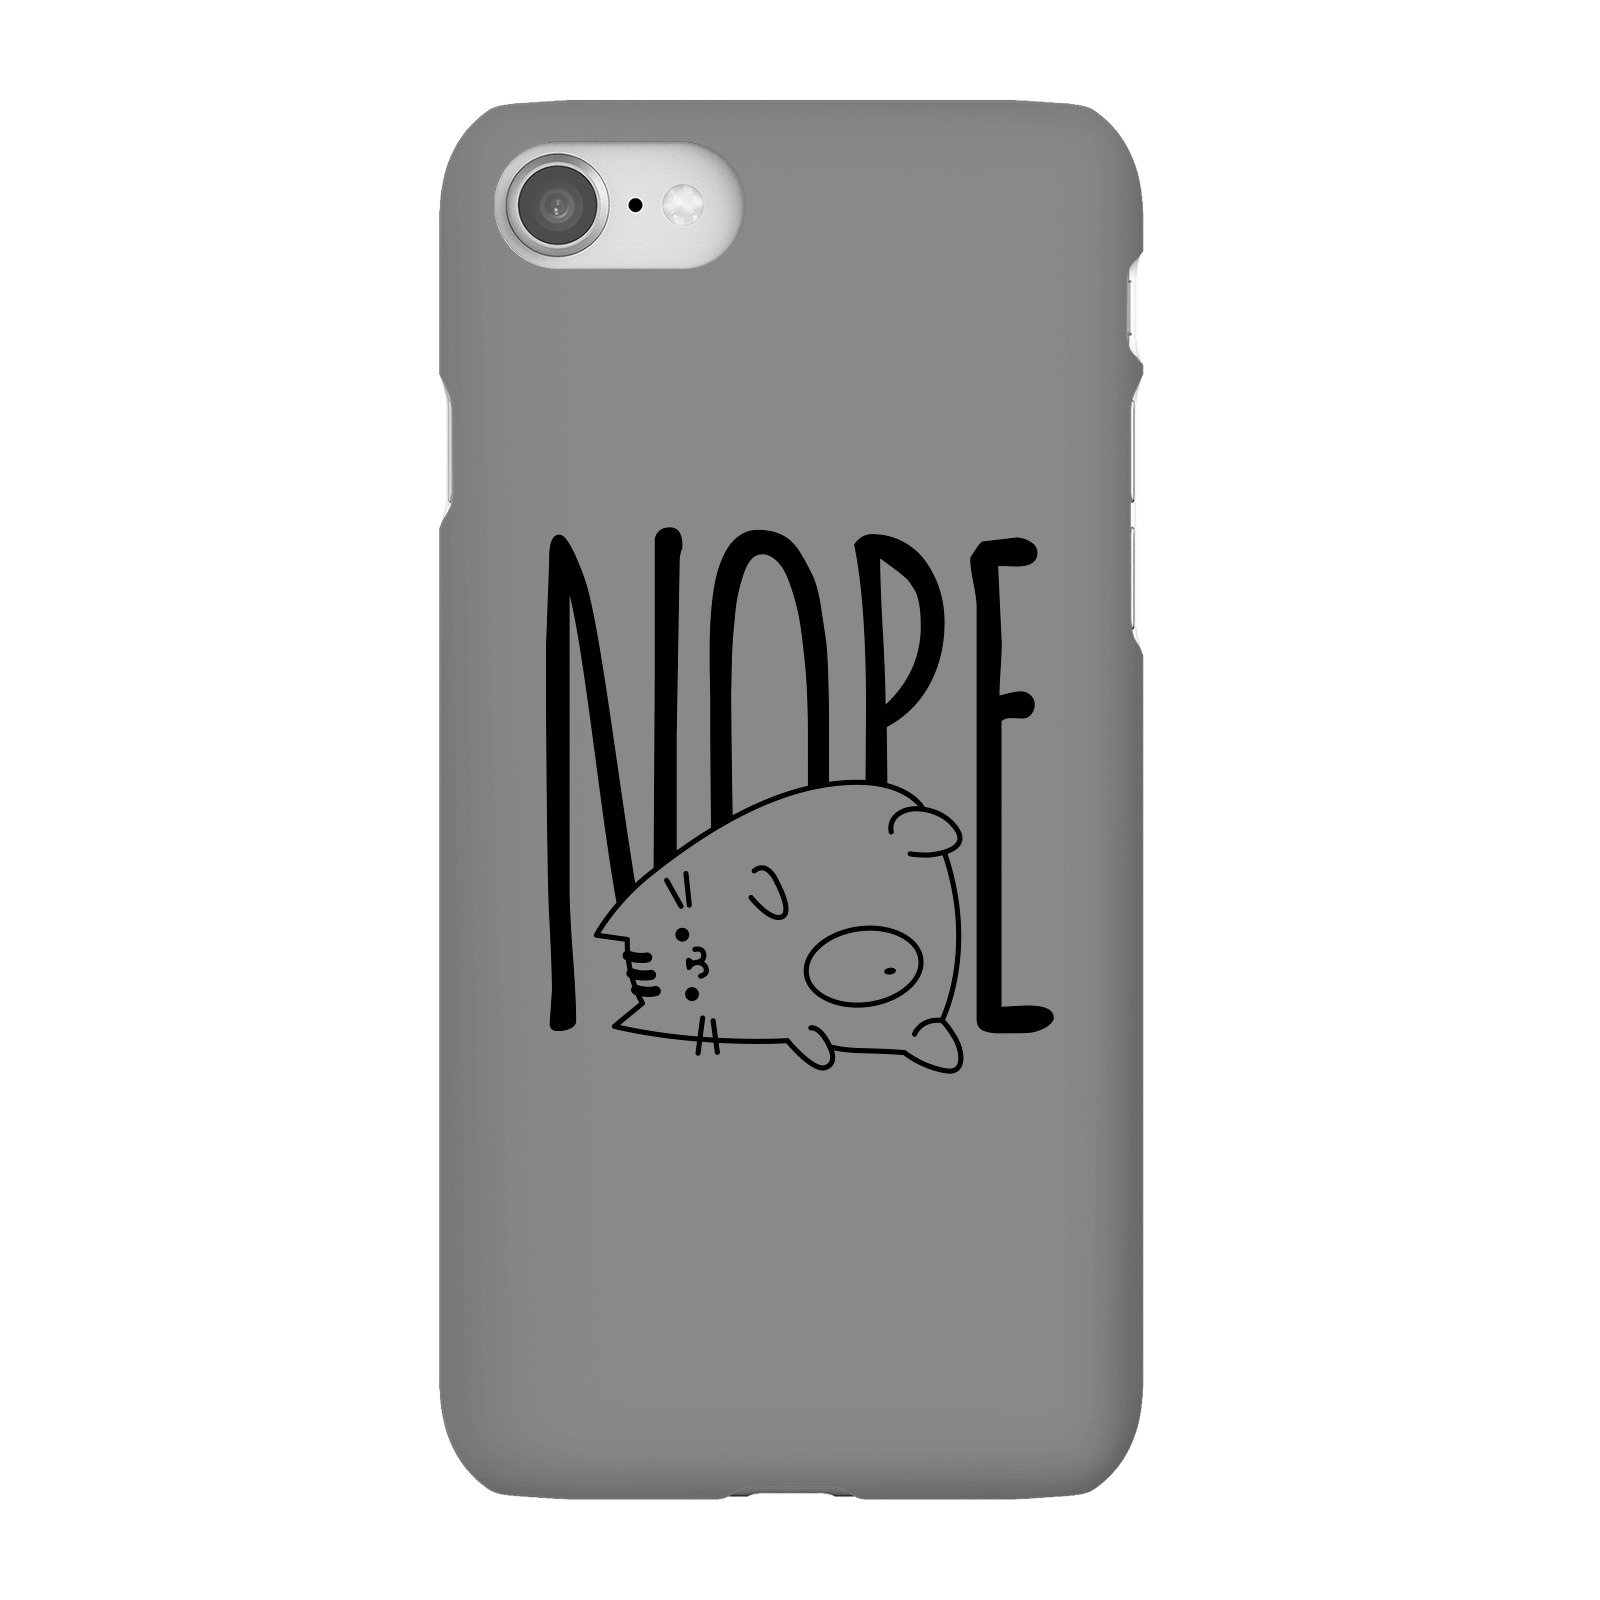 Nope Phone Case for iPhone and Android - iPhone 8 - Snap Case - Matte